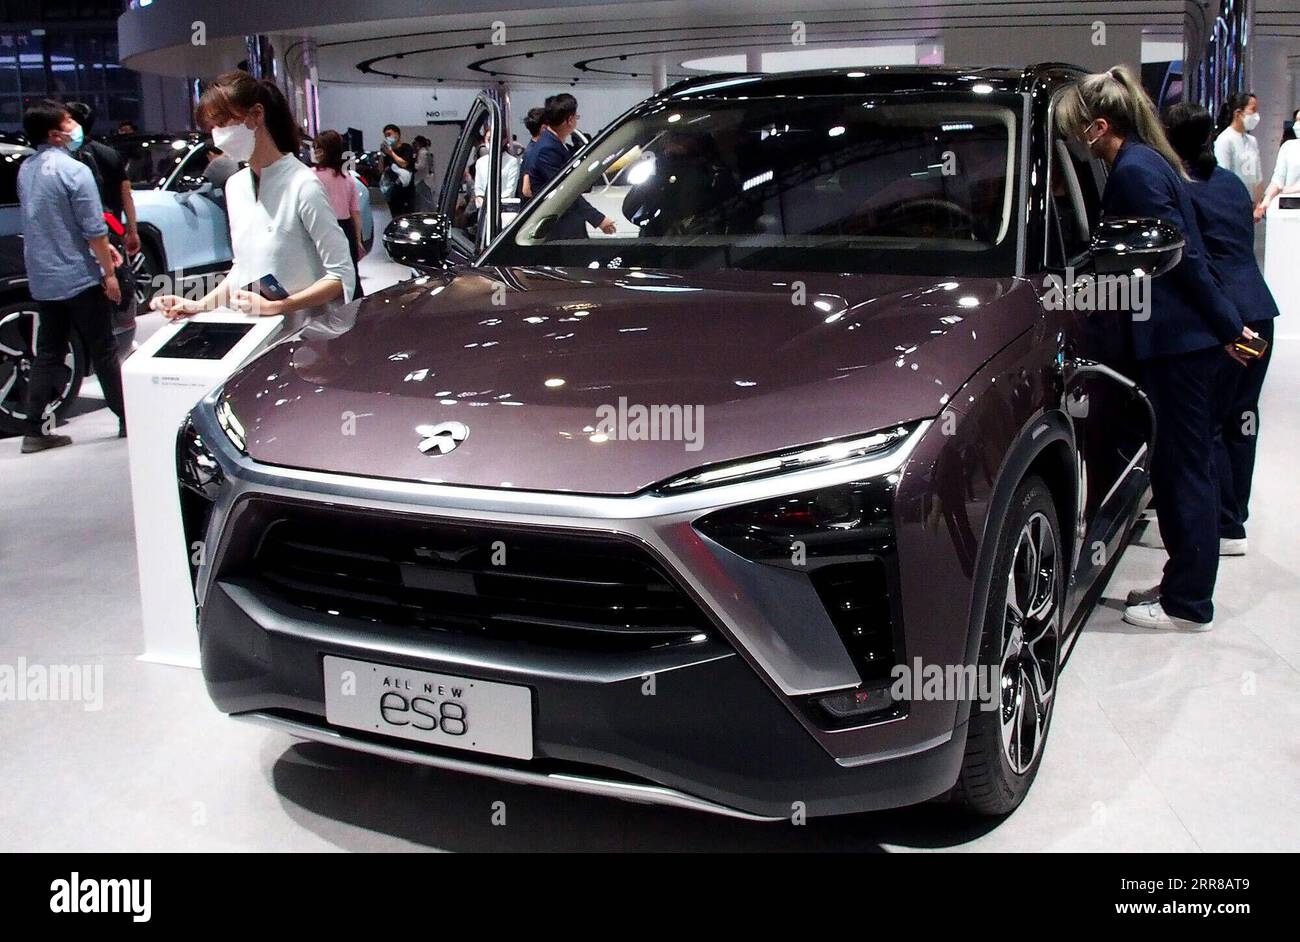 210428 -- SHANGHAI, April 28, 2021 -- A NIO ES8 electric SUV is displayed at the 19th International Automobile Industry Exhibition Auto Shanghai 2021 in Shanghai, east China, April 28, 2021. The 19th Shanghai International Automobile Industry Exhibition Auto Shanghai 2021 concluded on Wednesday. The 10-day auto show, which kicked off on April 19, attracted roughly 810,000 visitors and more than 1,000 companies in the auto industry. A total of 1,310 vehicle models were displayed at the show, according to the organizer. Auto Shanghai 2021 is the first major auto show globally to run normally ami Stock Photo